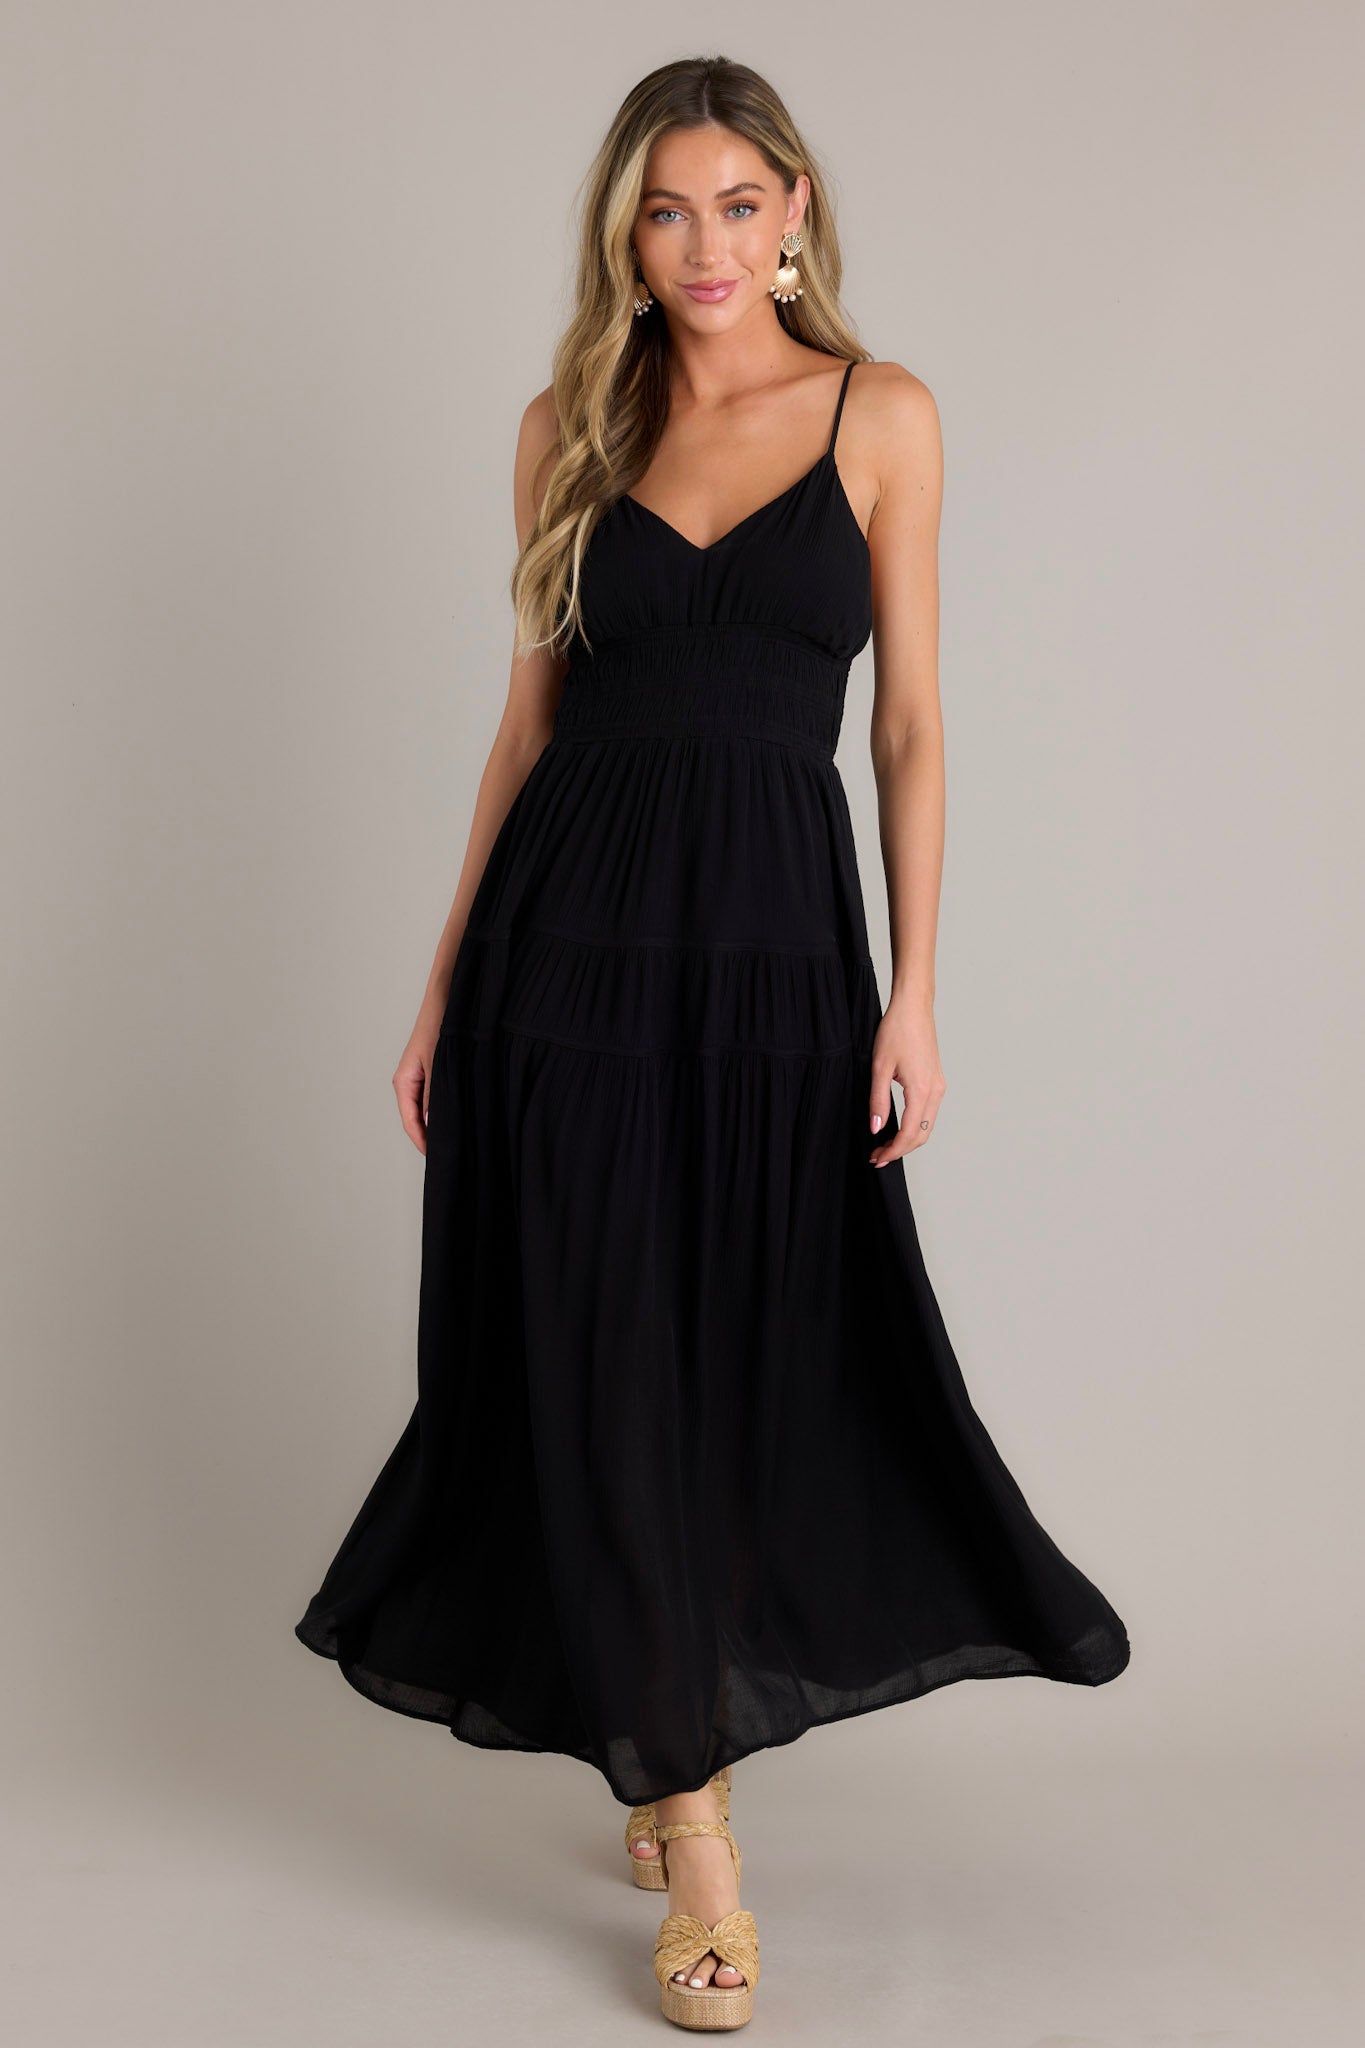 Full length view of a model wearing a black maxi dress with a v-neckline, thin adjustable straps, open back, fully smocked waist and lower back, tiers, and a flowing silhouette.